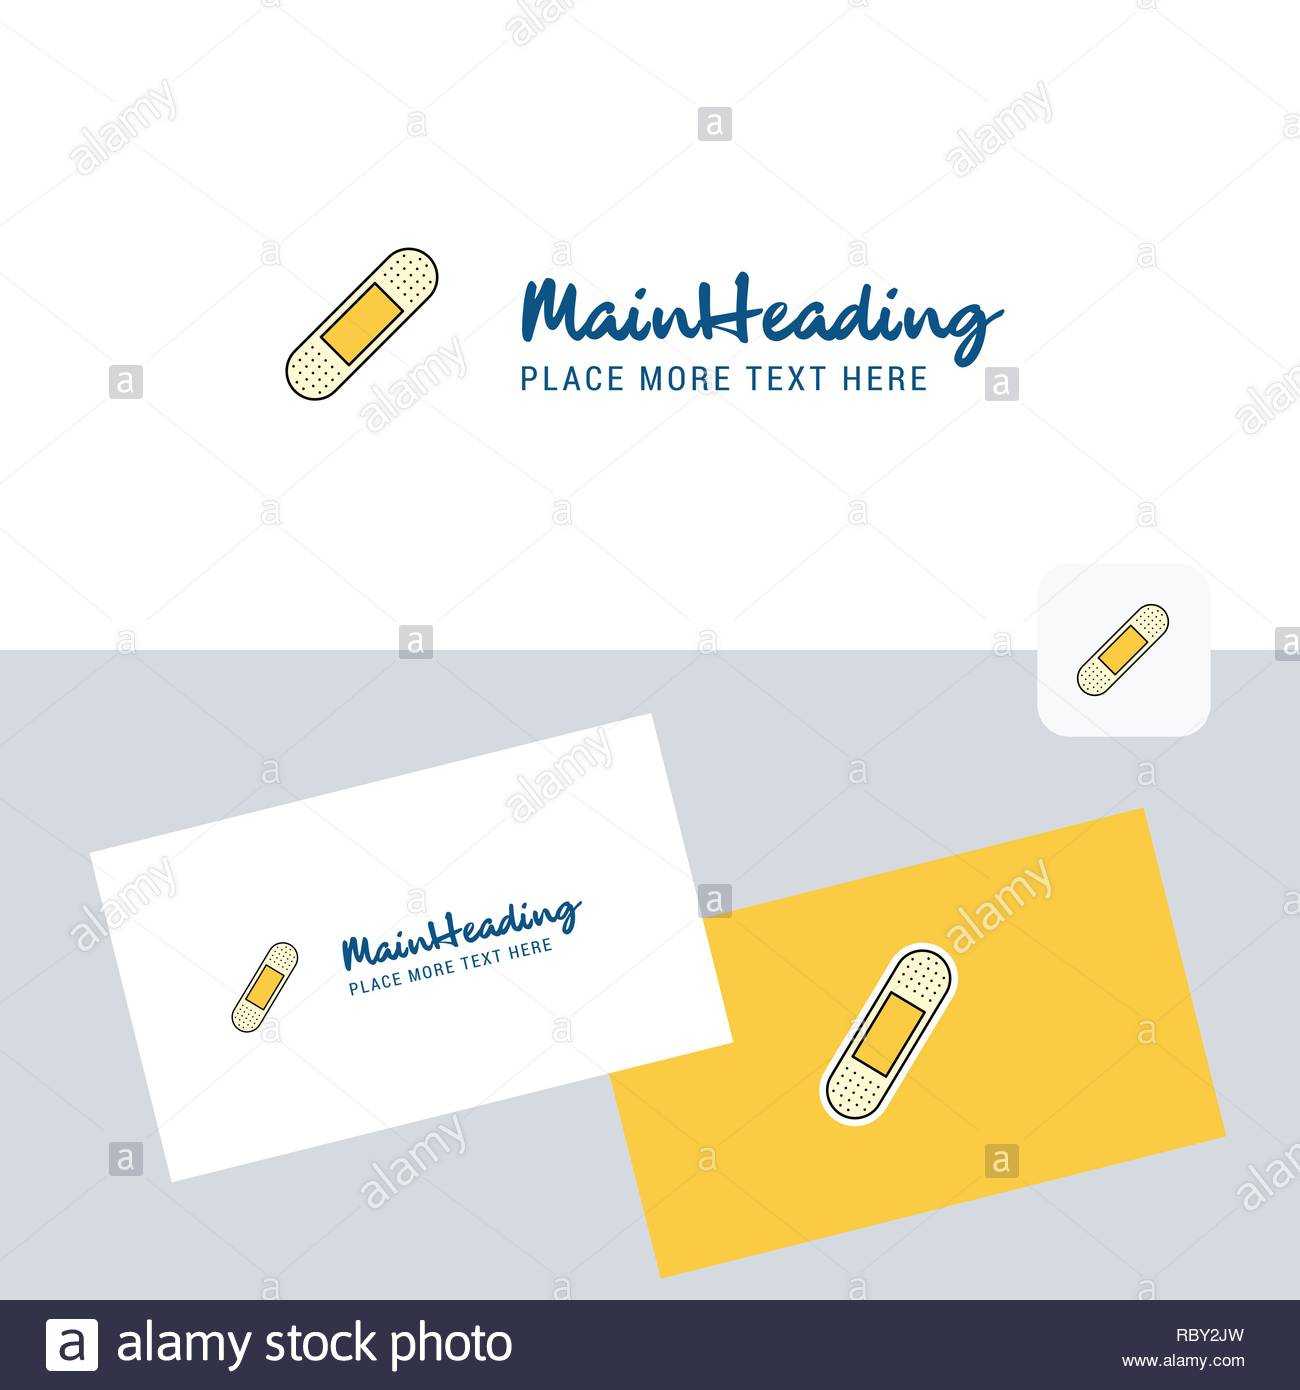 Plaster Vector Logotype With Business Card Template. Elegant Throughout Plastering Business Cards Templates